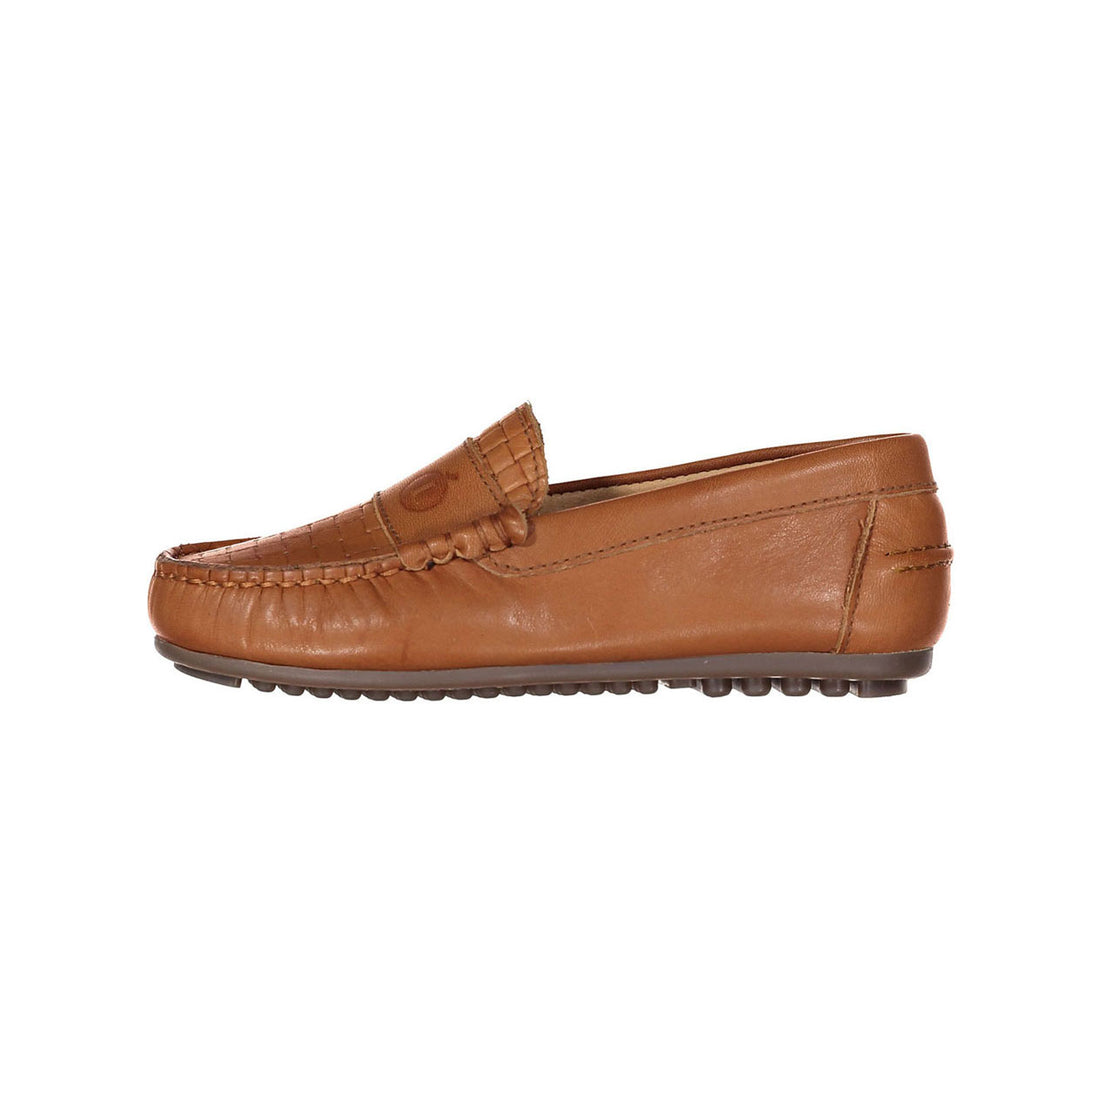 Ladida Cognac Woven Leather Loafer